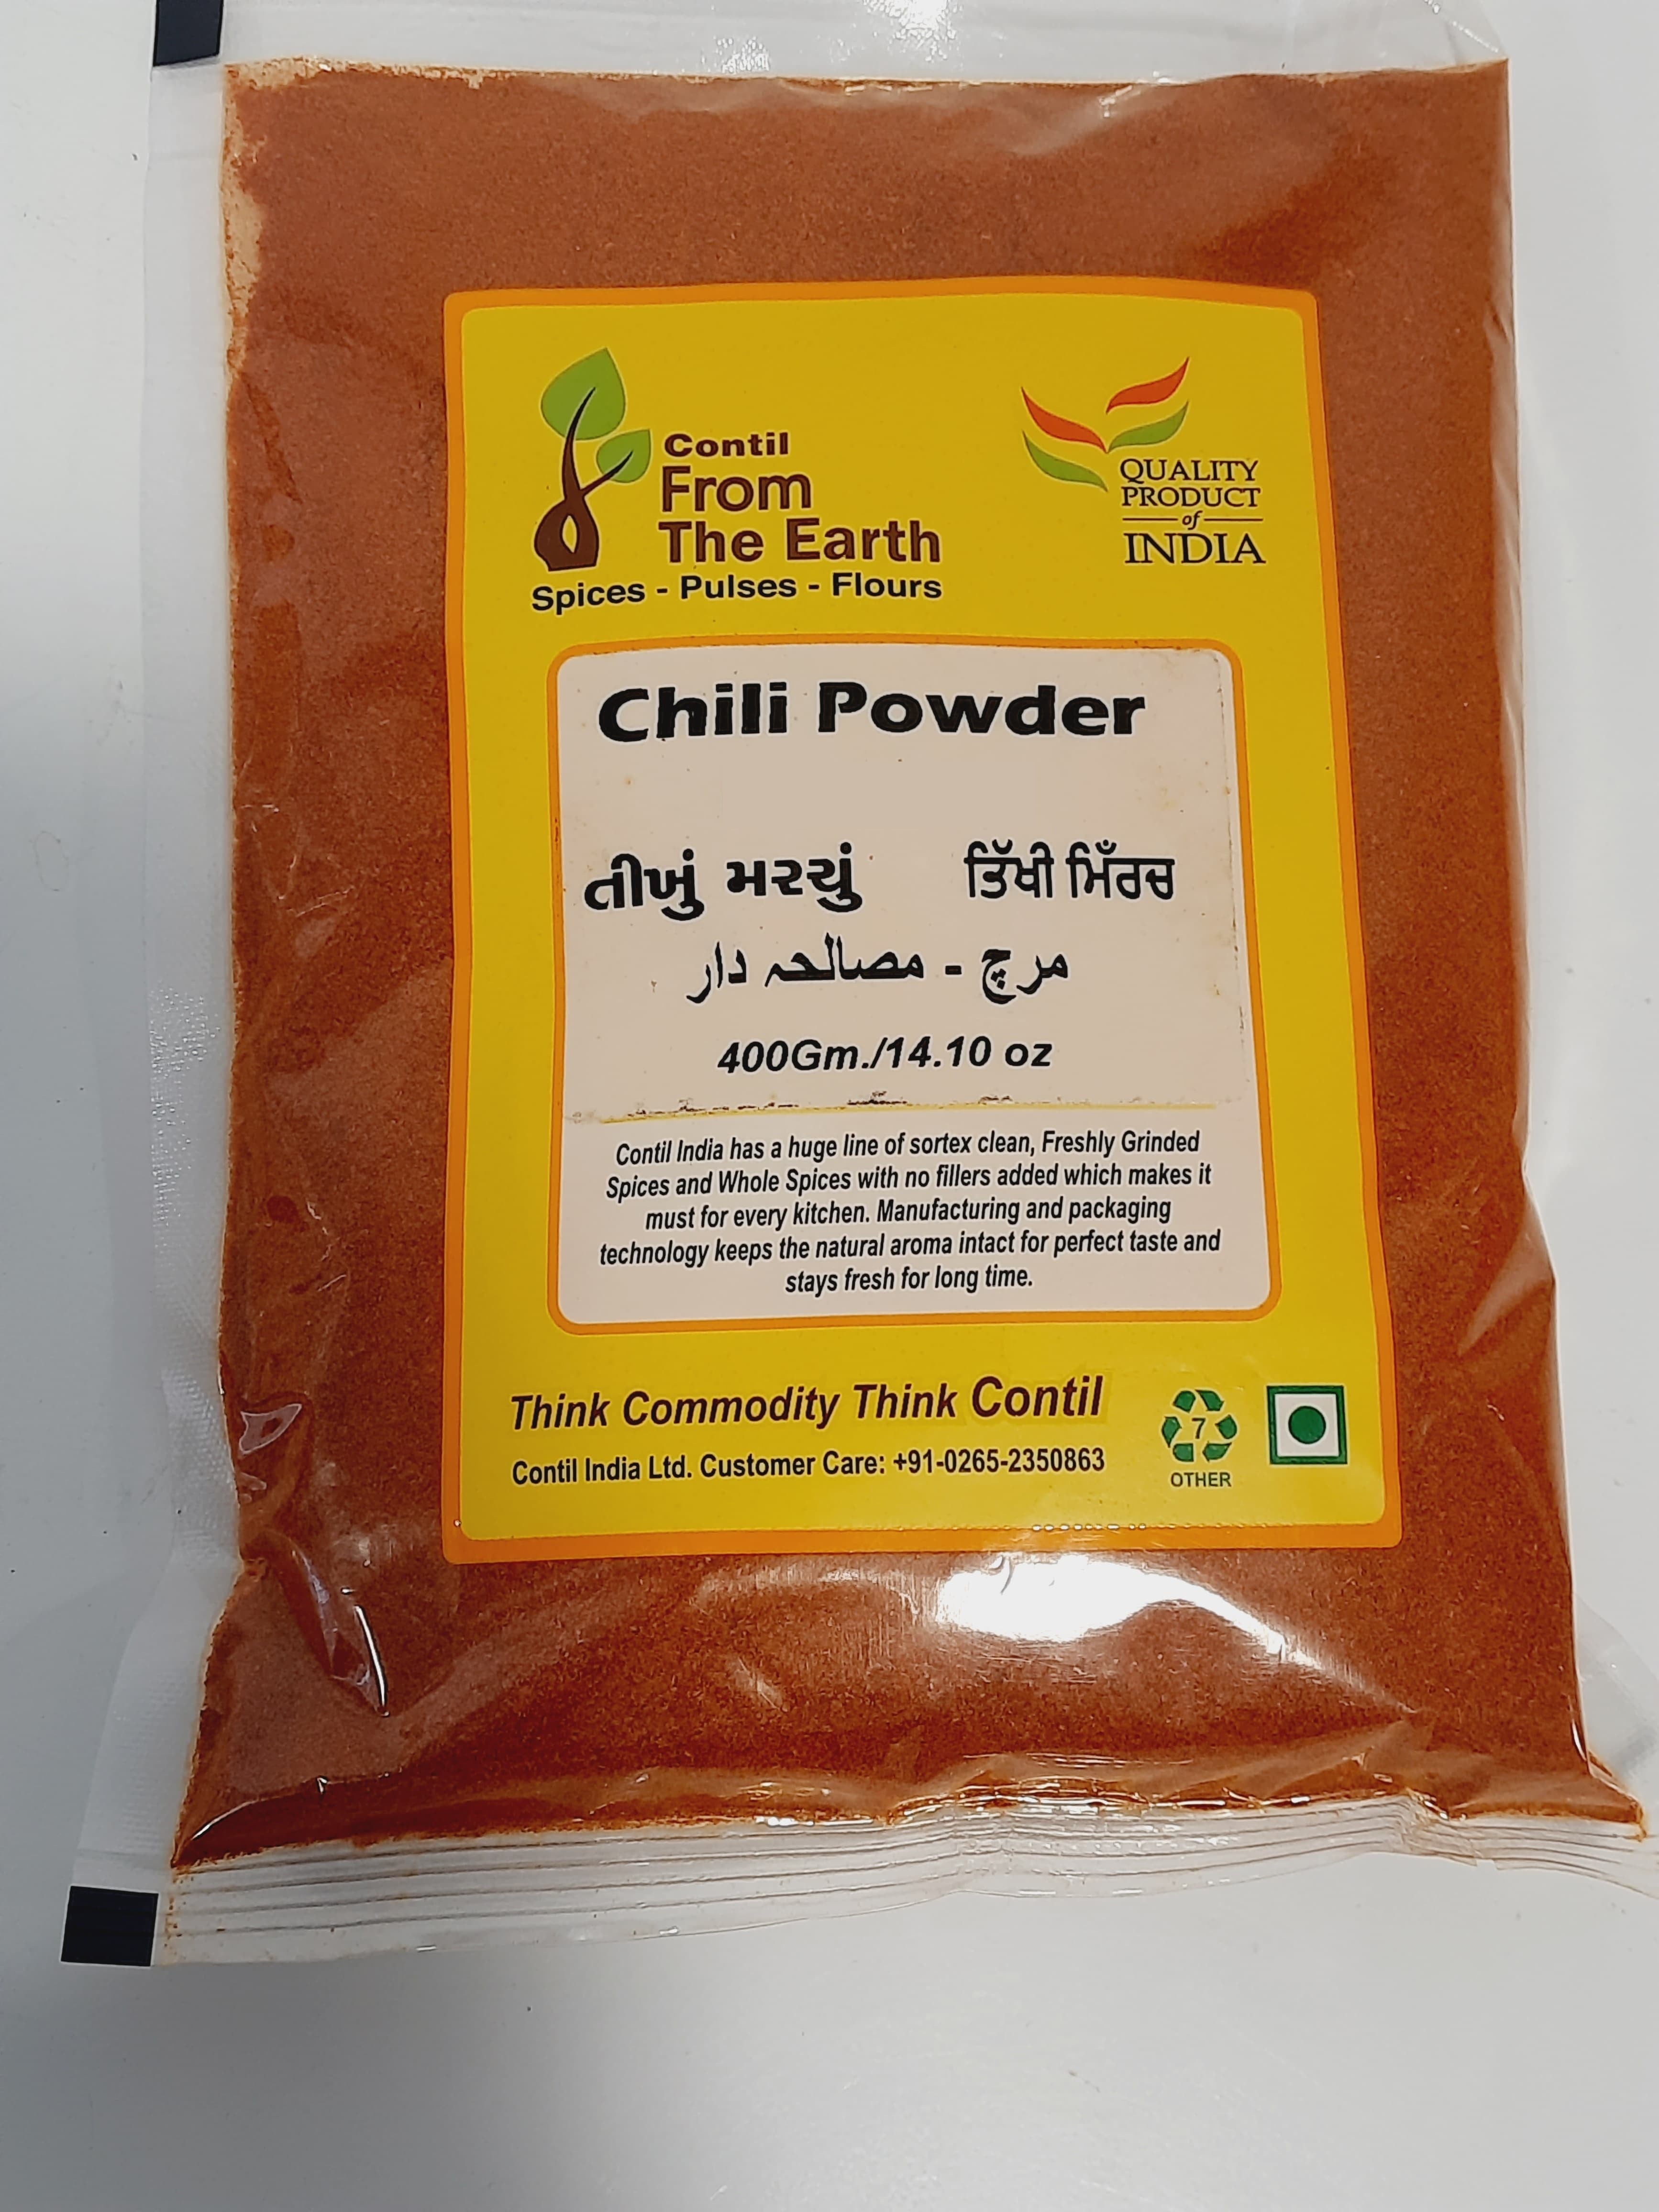 From the Earth - Chilli Powder Regular 400g